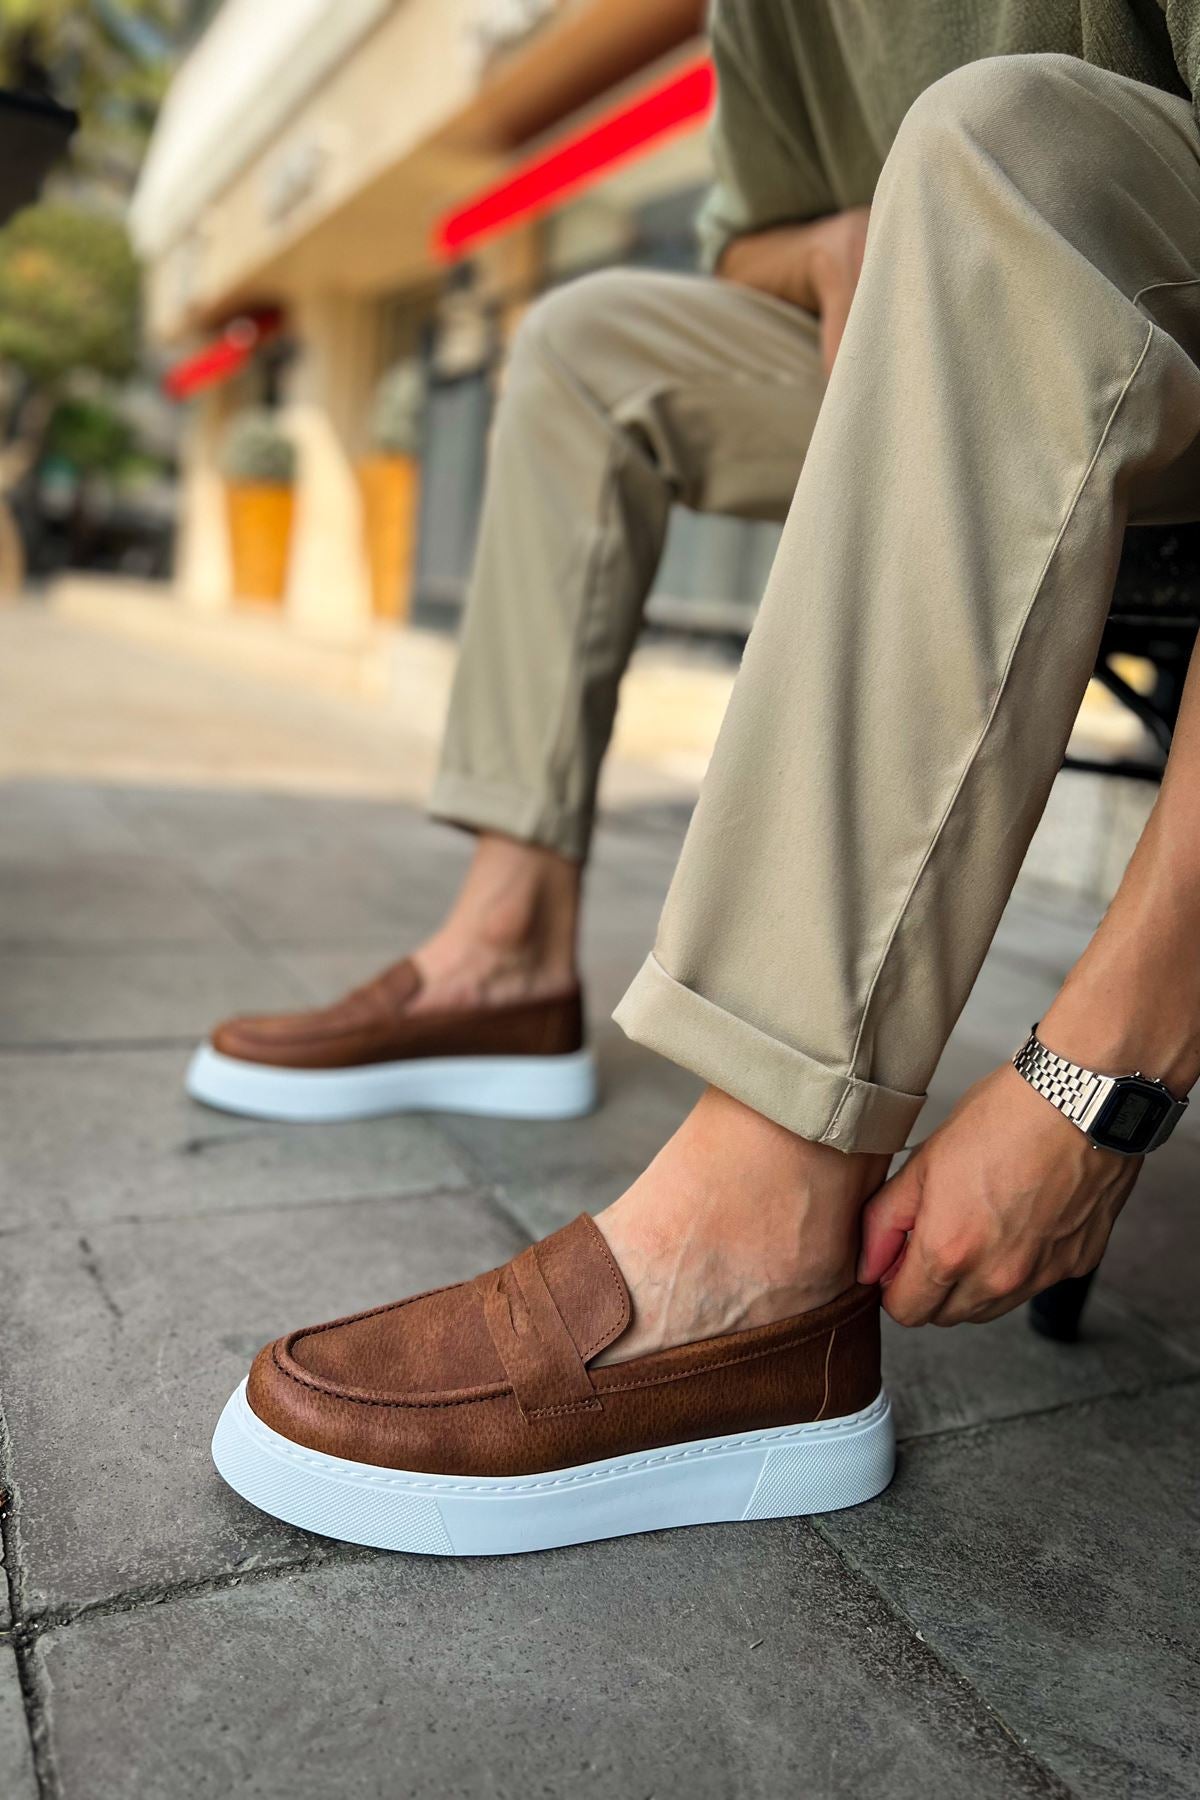 CH421 CBT Bandera Men's Casual Shoes Brown - STREETMODE ™